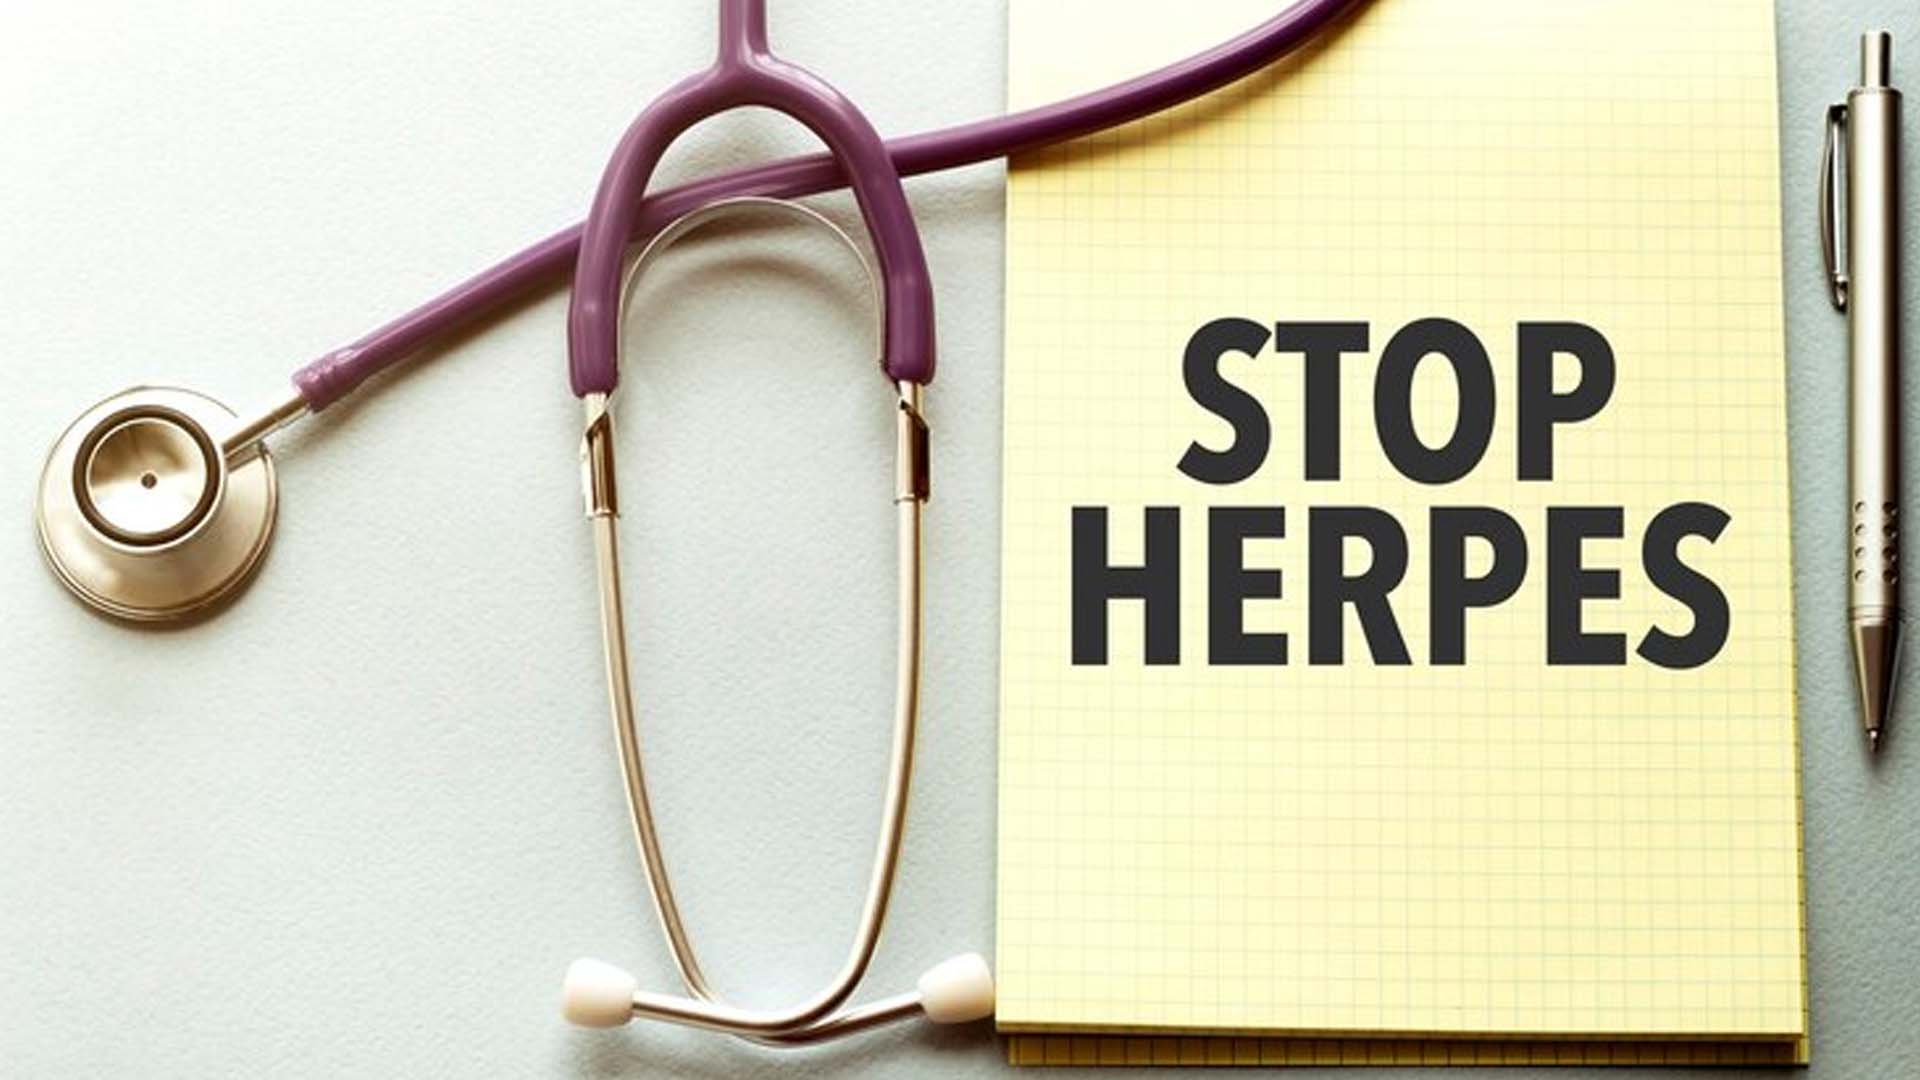 What are the Home Remedies for Herpes?